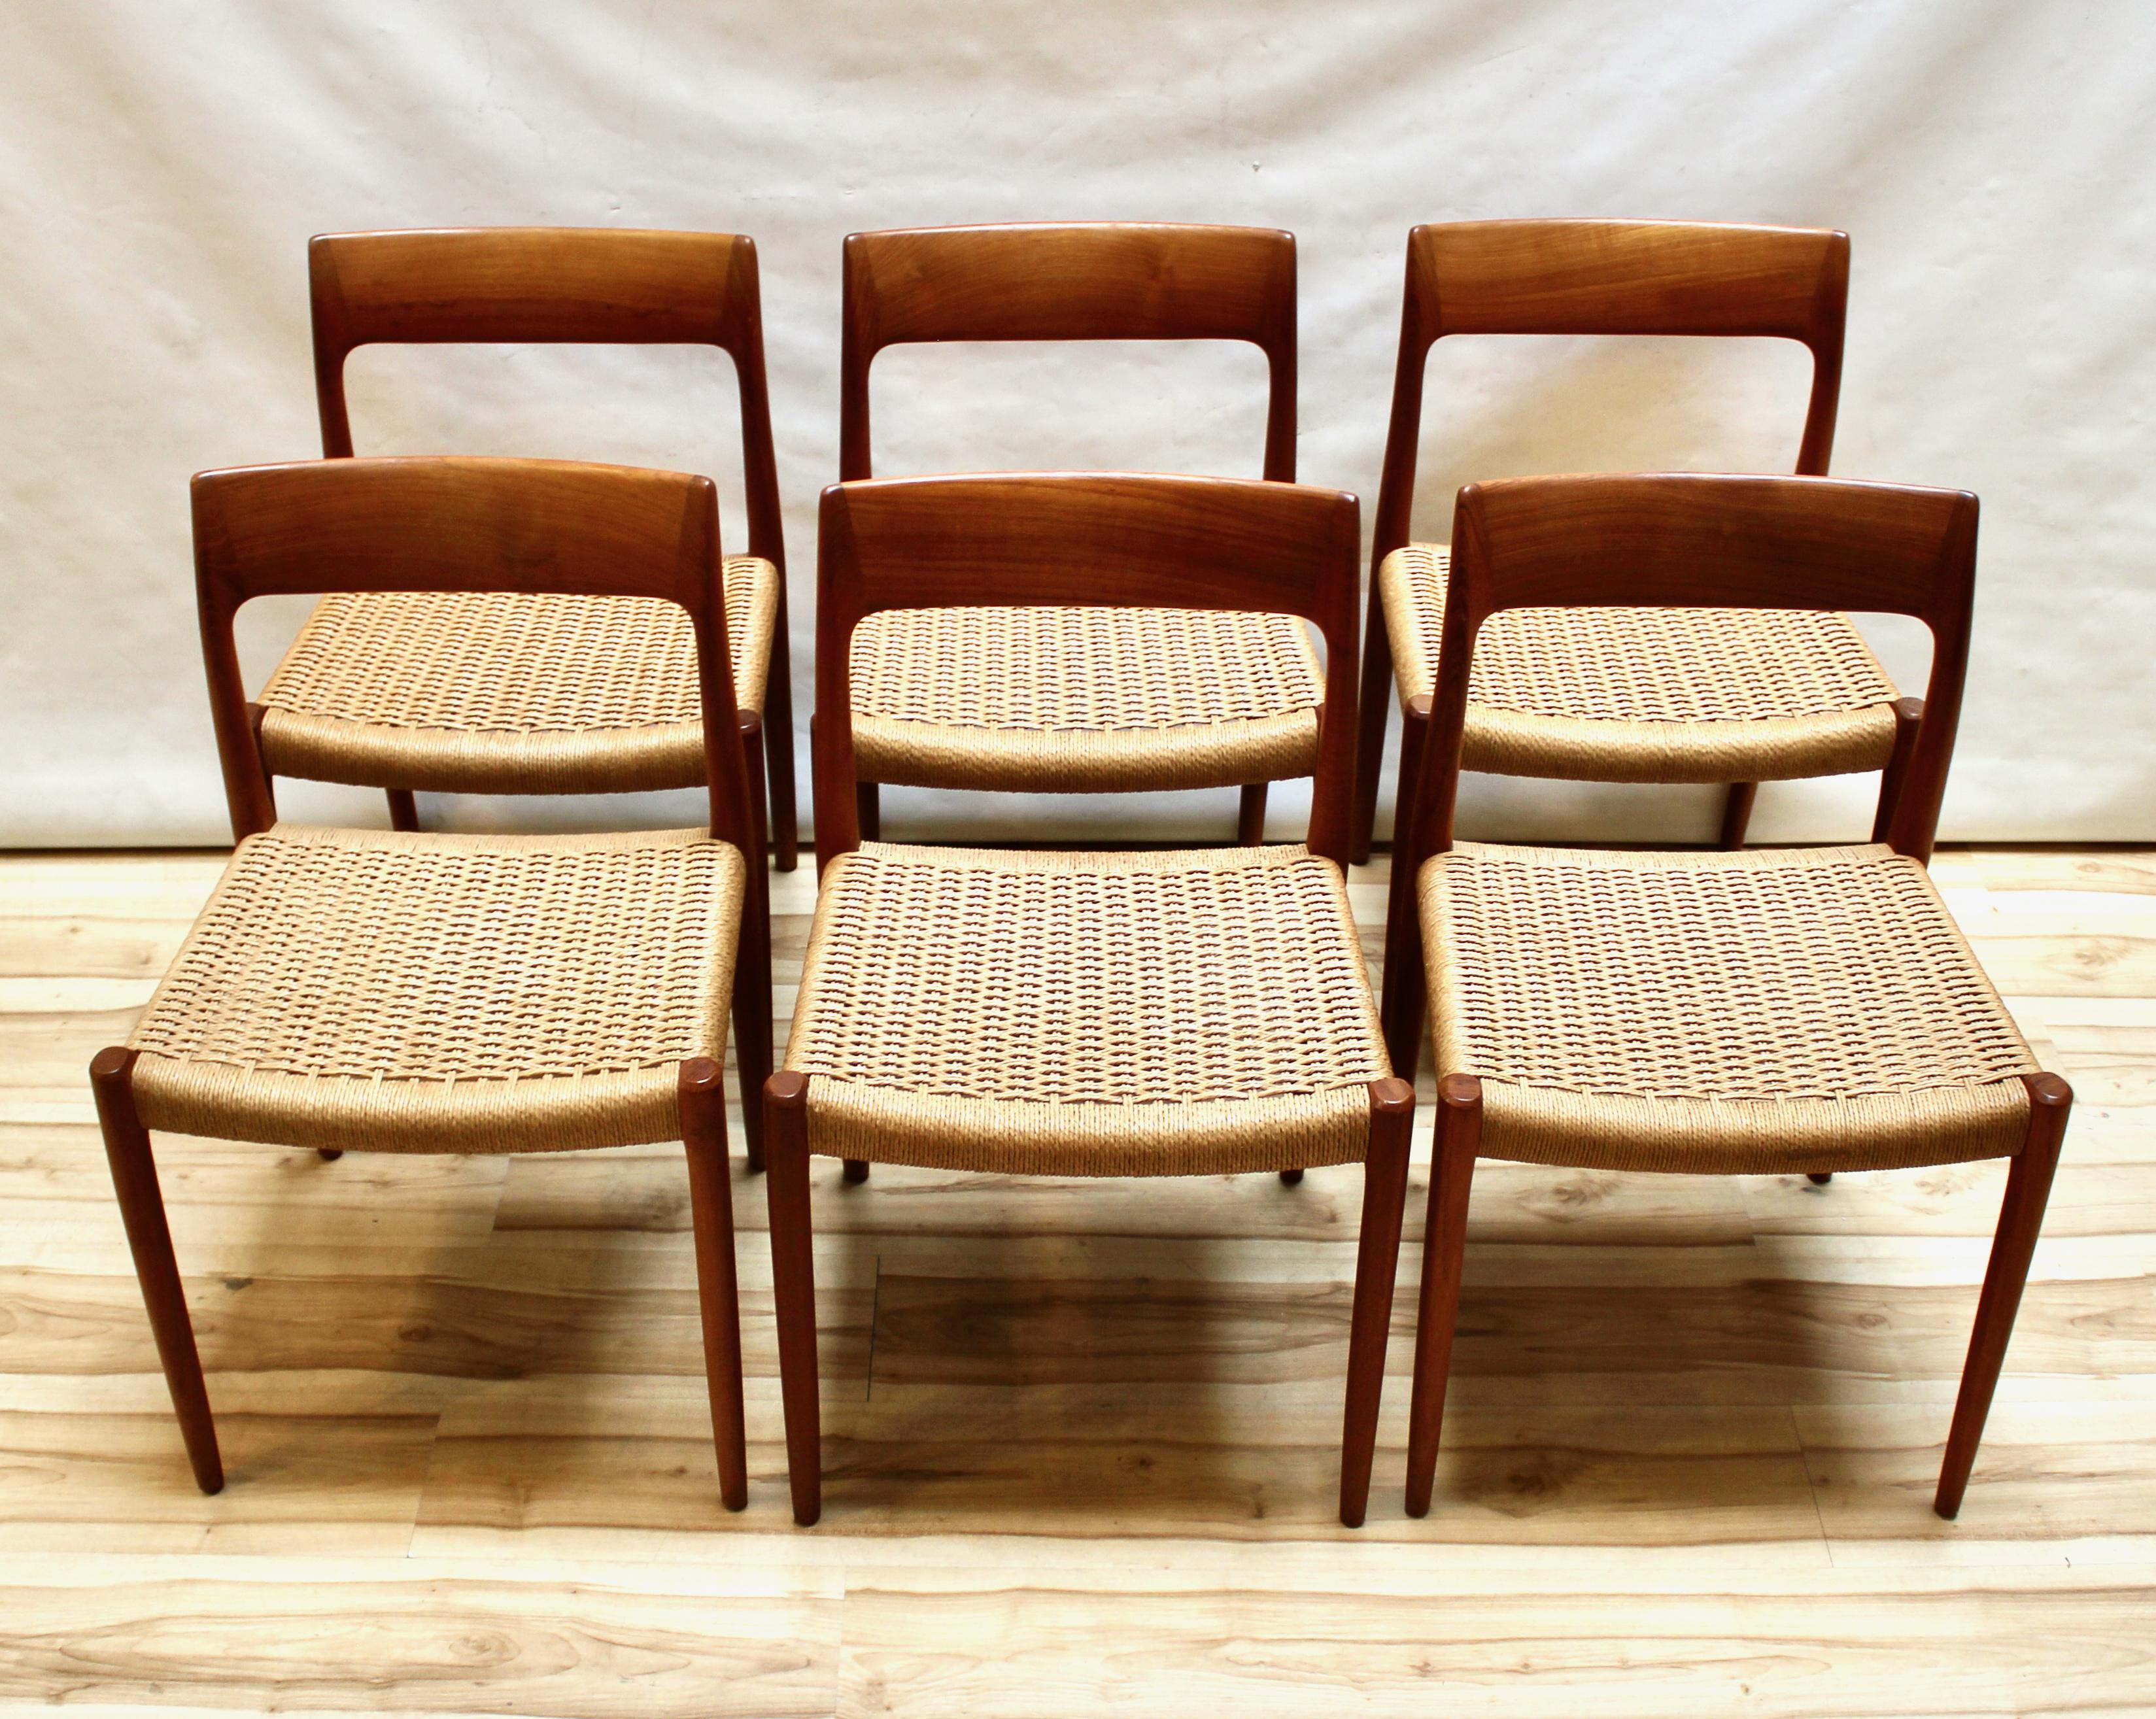 Set of six 1960s Danish Modern teak and cord dining chairs by Niels Moller for J.L. Moller. Made in Denmark, the chairs have elegantly curved backs. In excellent condition with no damage to the seat cord. Marked with J.L. Moller and Danish Control